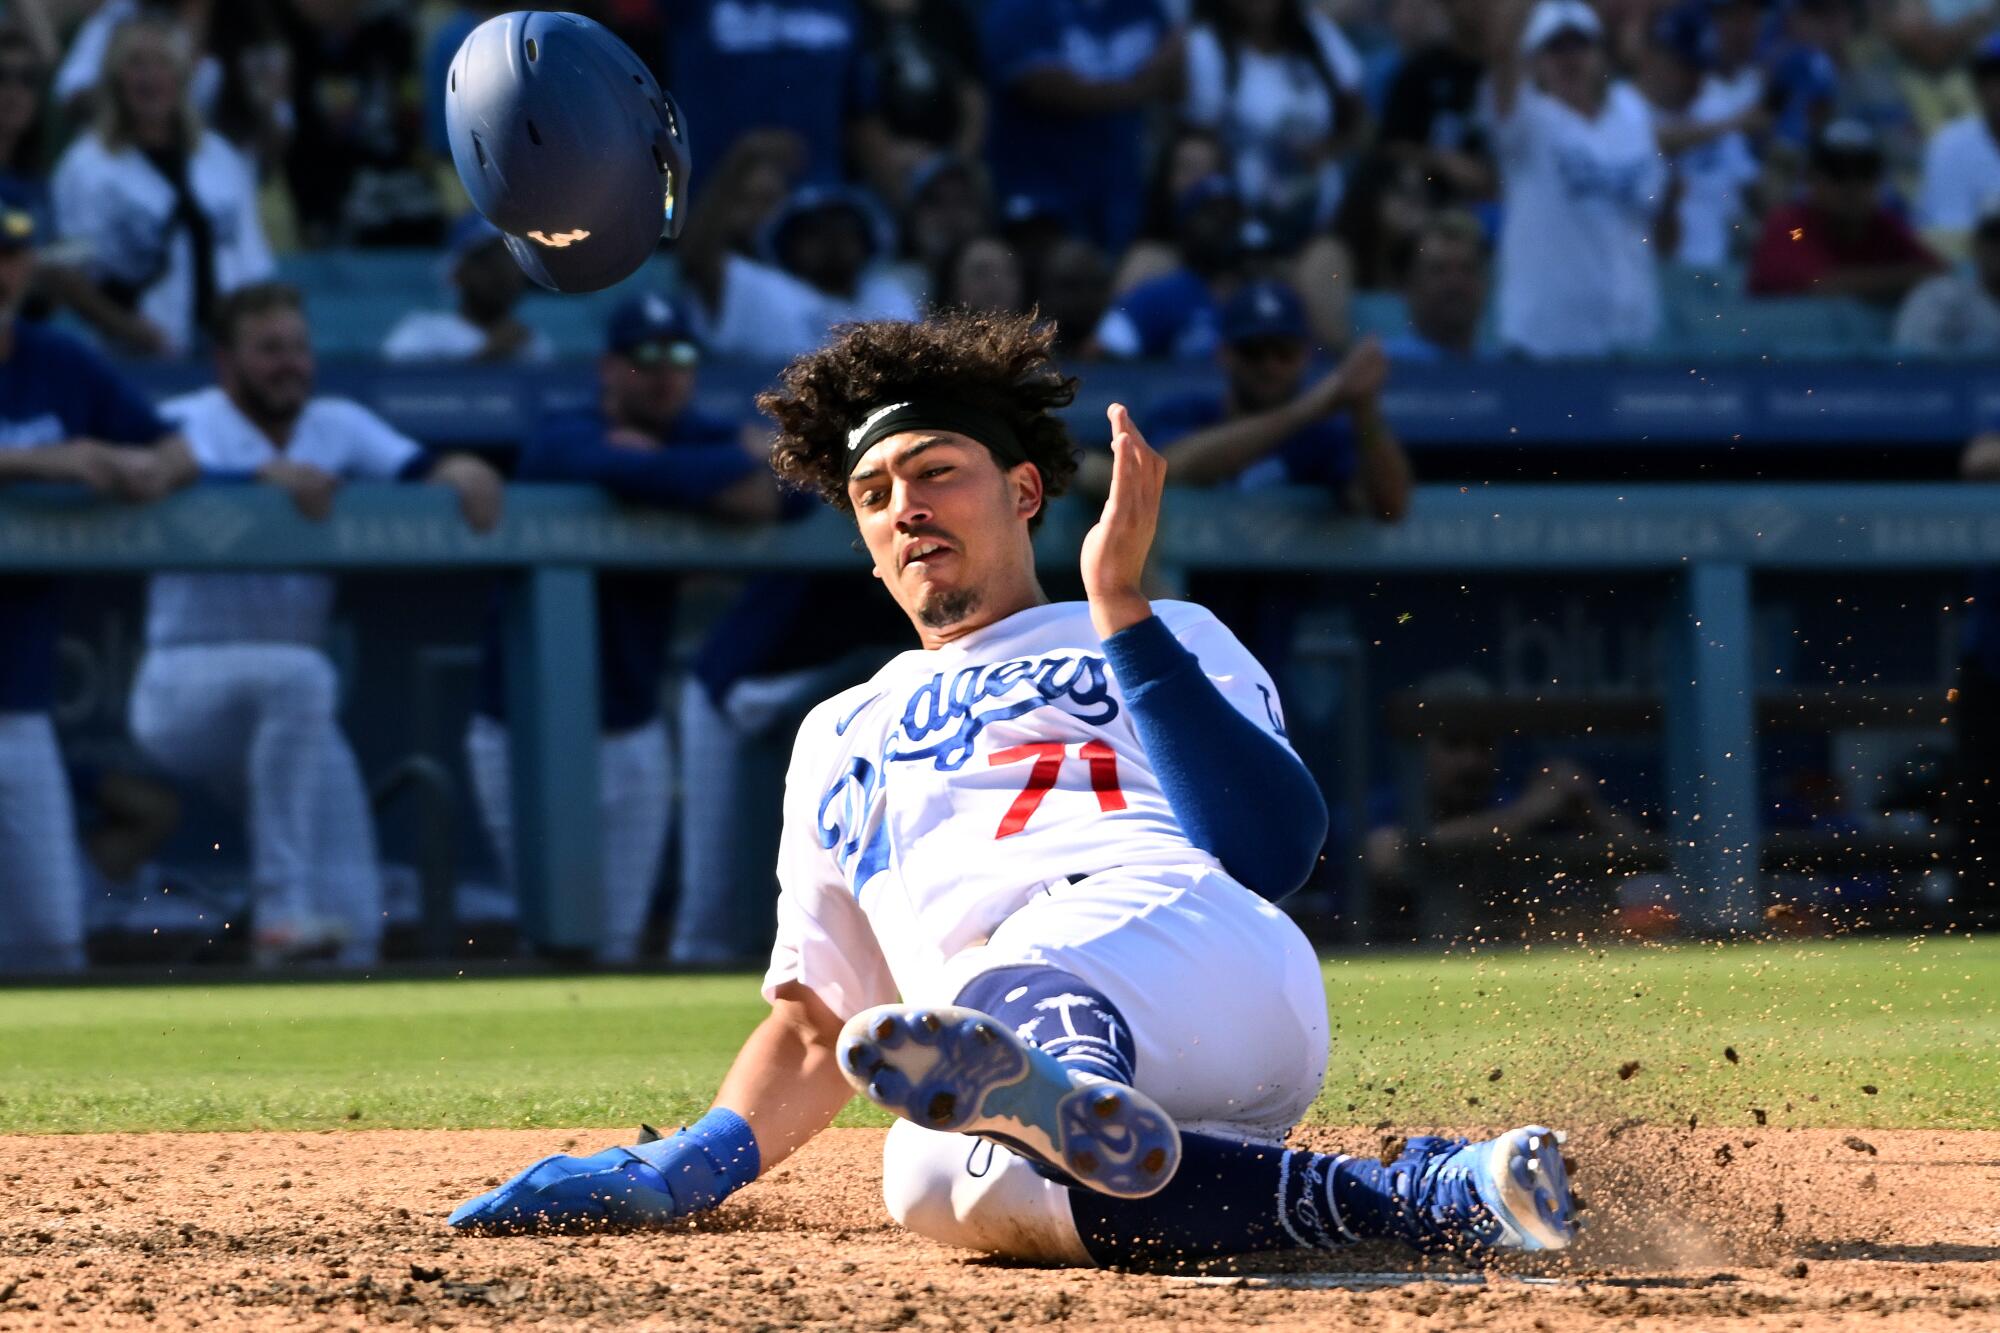 Dodgers rookie Miguel Vargas has his helmet fly off his head as he slides into home plate.